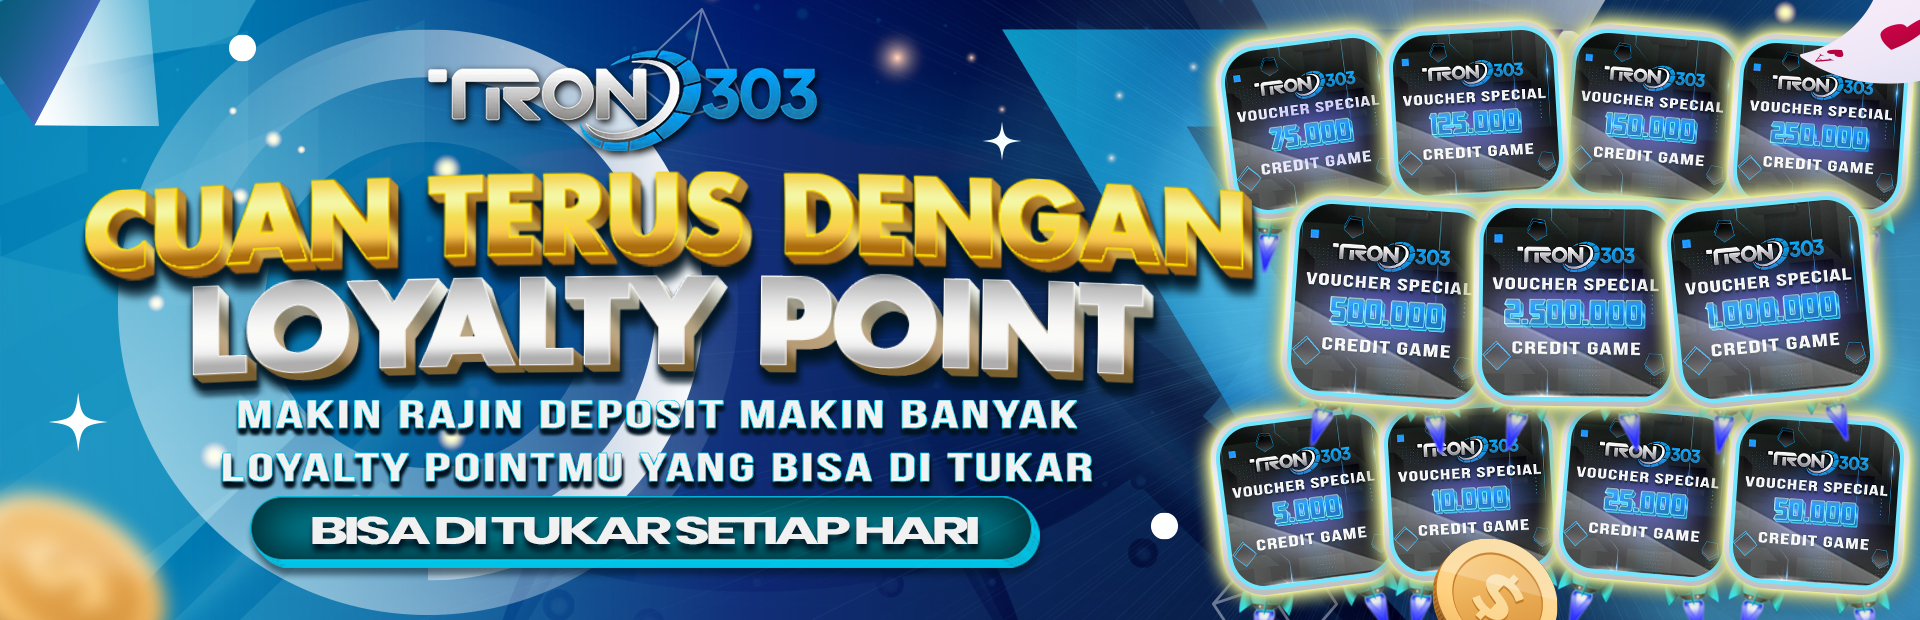 LOYALTY POINT EXCLUSIVE TRON303